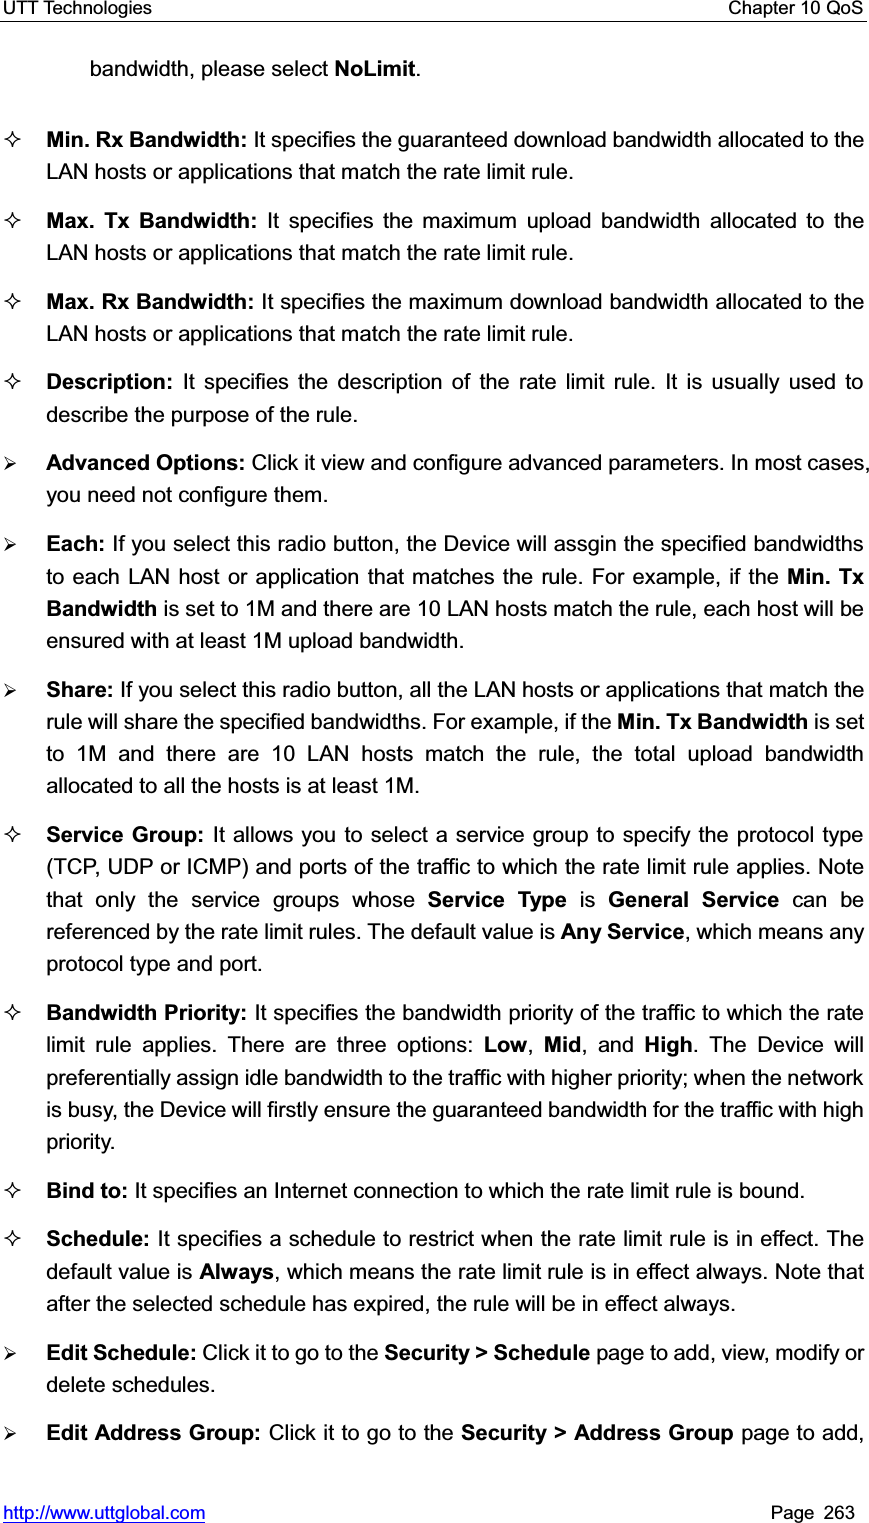 UTT Technologies    Chapter 10 QoS   http://www.uttglobal.com Page 263 bandwidth, please select NoLimit.Min. Rx Bandwidth: It specifies the guaranteed download bandwidth allocated to the LAN hosts or applications that match the rate limit rule.Max. Tx Bandwidth: It specifies the maximum upload bandwidth allocated to the LAN hosts or applications that match the rate limit rule.Max. Rx Bandwidth: It specifies the maximum download bandwidth allocated to the LAN hosts or applications that match the rate limit rule.Description: It specifies the description of the rate limit rule. It is usually used to describe the purpose of the rule.¾Advanced Options: Click it view and configure advanced parameters. In most cases, you need not configure them. ¾Each: If you select this radio button, the Device will assgin the specified bandwidths to each LAN host or application that matches the rule. For example, if the Min. Tx Bandwidth is set to 1M and there are 10 LAN hosts match the rule, each host will be ensured with at least 1M upload bandwidth.   ¾Share: If you select this radio button, all the LAN hosts or applications that match the rule will share the specified bandwidths. For example, if the Min. Tx Bandwidth is set to 1M and there are 10 LAN hosts match the rule, the total upload bandwidth allocated to all the hosts is at least 1M. Service Group: It allows you to select a service group to specify the protocol type (TCP, UDP or ICMP) and ports of the traffic to which the rate limit rule applies. Note that only the service groups whose Service Type is General Service can be referenced by the rate limit rules. The default value is Any Service, which means any protocol type and port.Bandwidth Priority: It specifies the bandwidth priority of the traffic to which the rate limit rule applies. There are three options: Low,Mid, and High. The Device will preferentially assign idle bandwidth to the traffic with higher priority; when the network is busy, the Device will firstly ensure the guaranteed bandwidth for the traffic with high priority.  Bind to: It specifies an Internet connection to which the rate limit rule is bound. Schedule: It specifies a schedule to restrict when the rate limit rule is in effect. The default value is Always, which means the rate limit rule is in effect always. Note that after the selected schedule has expired, the rule will be in effect always.   ¾Edit Schedule: Click it to go to the Security &gt; Schedule page to add, view, modify or delete schedules.¾Edit Address Group: Click it to go to the Security &gt; Address Group page to add, 